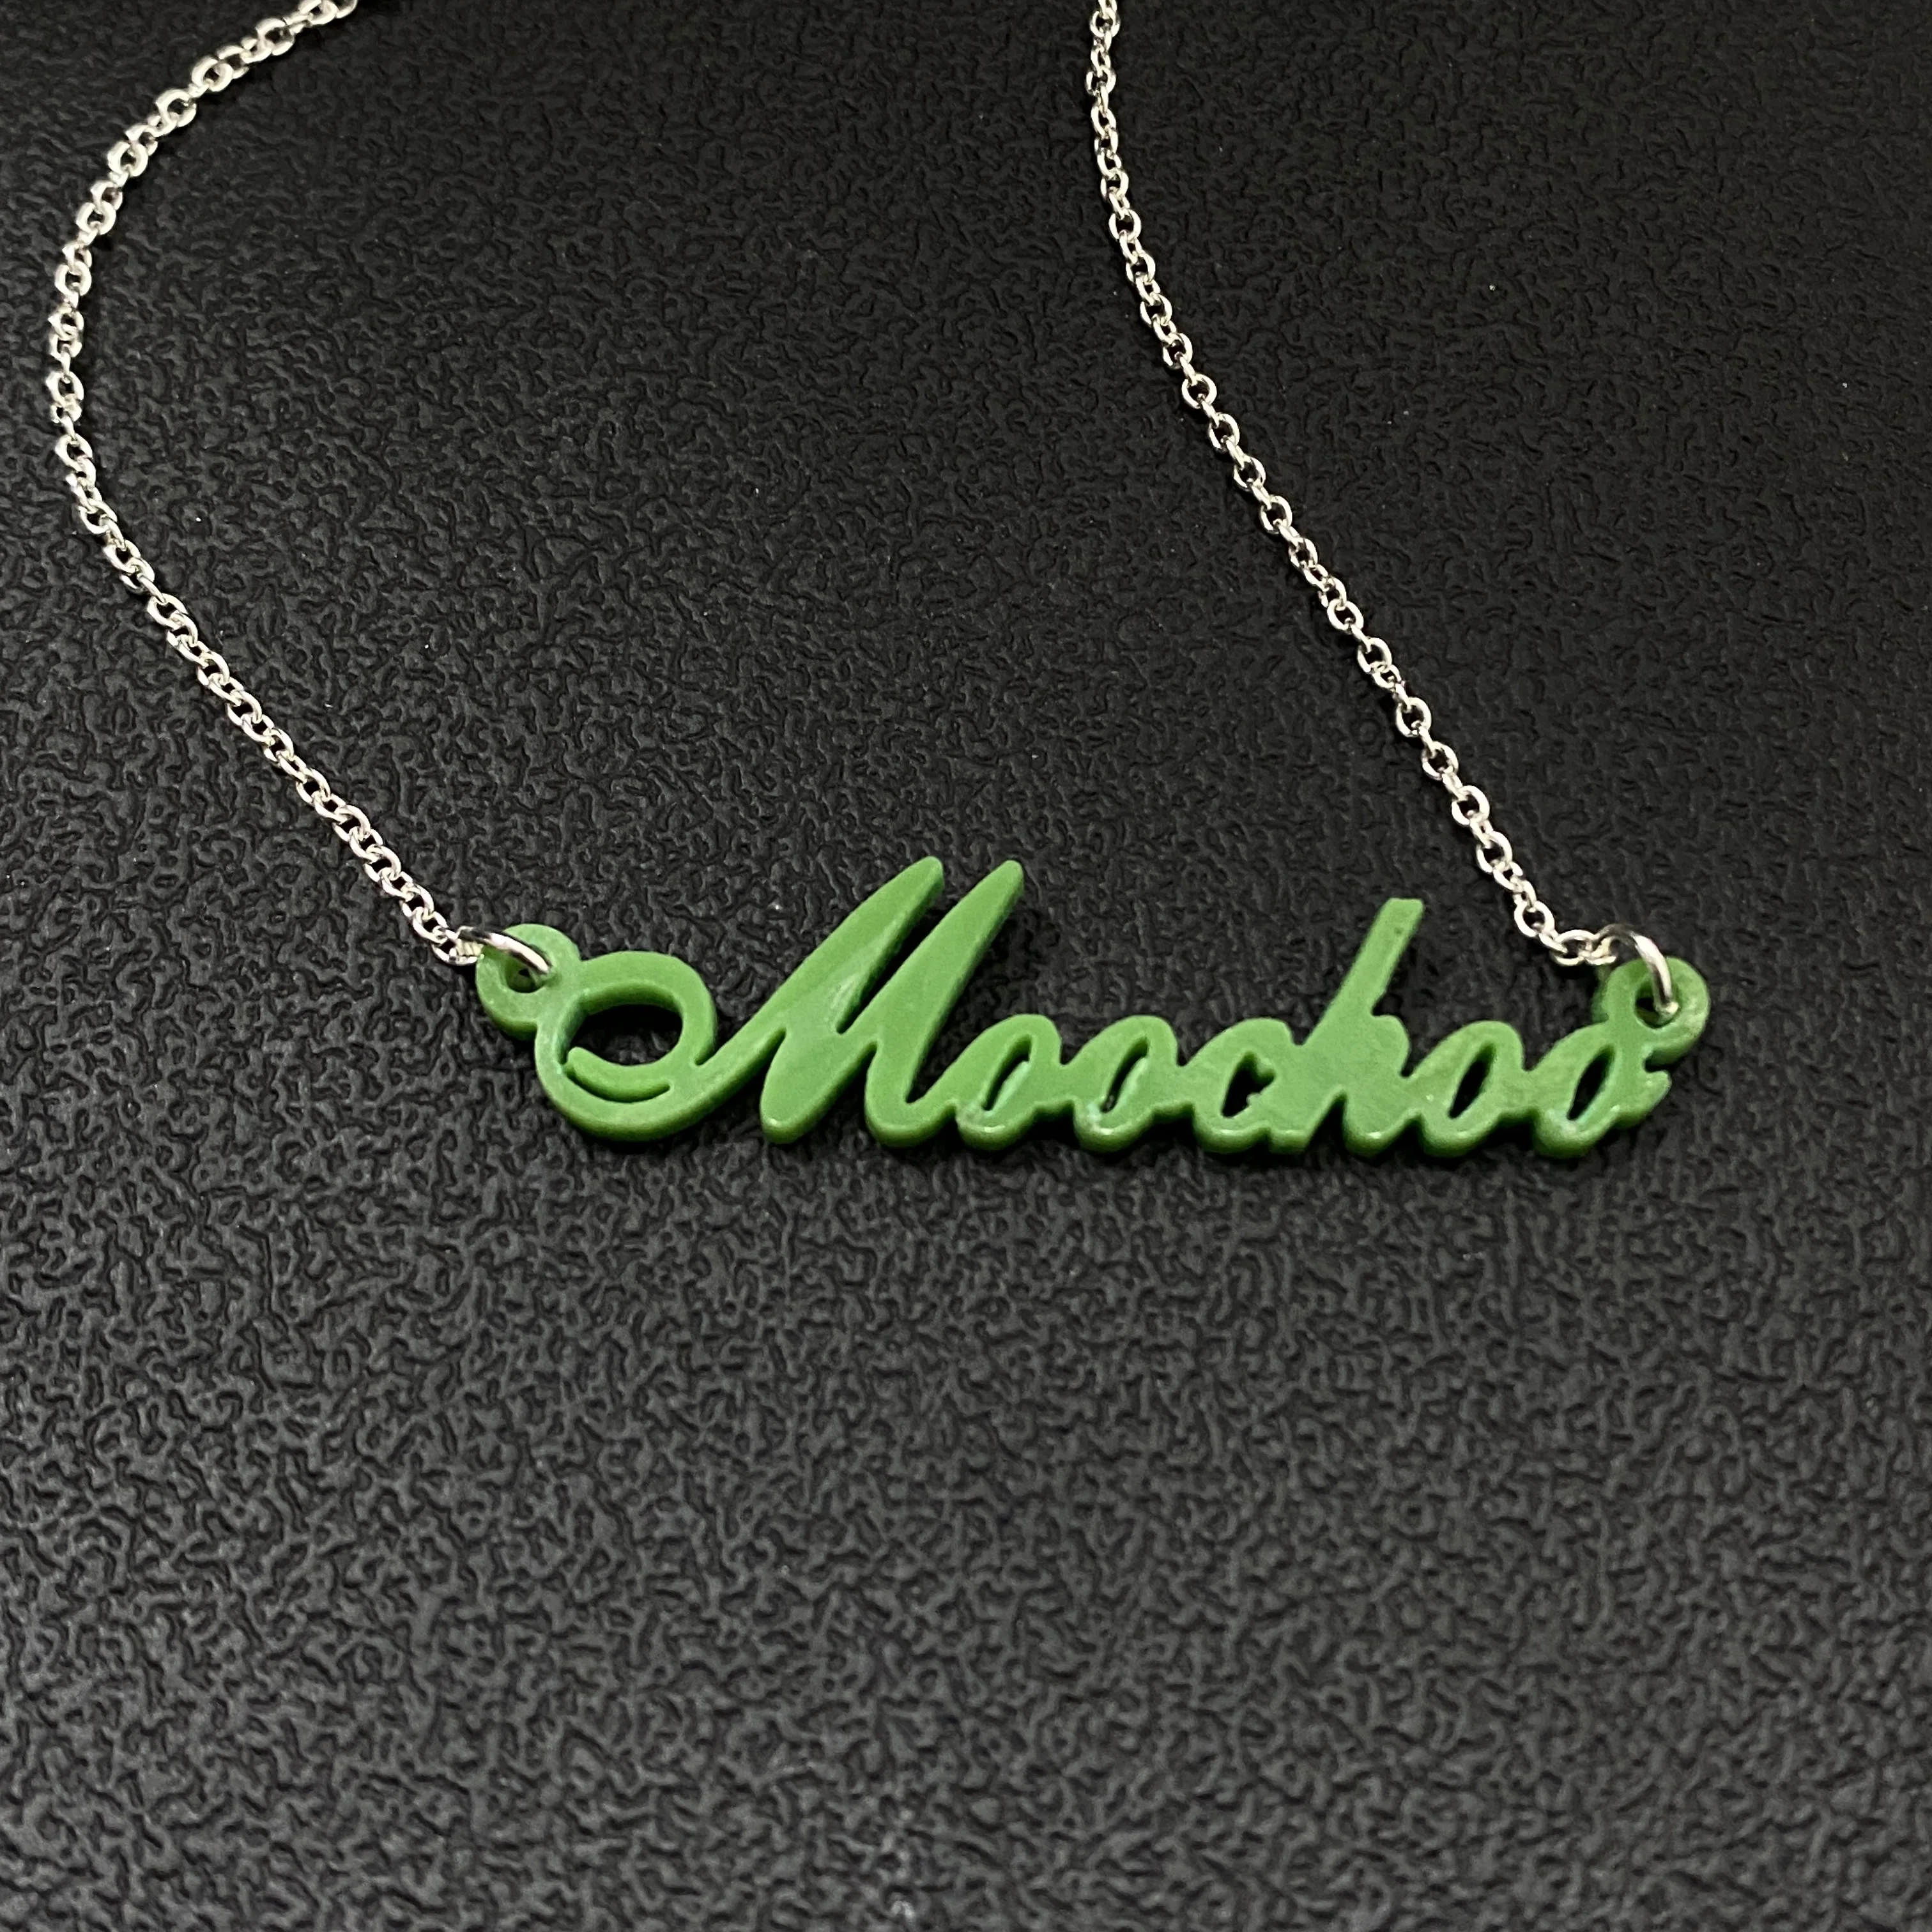 Personalized Custom Name Necklace Hip hop Customized Acrylic Pendant Necklace Fashion DIY Necklace Jewelry for Men Women Kids stackable acrylic desk marker stationery storage holder makeup jewelry display holder dropship